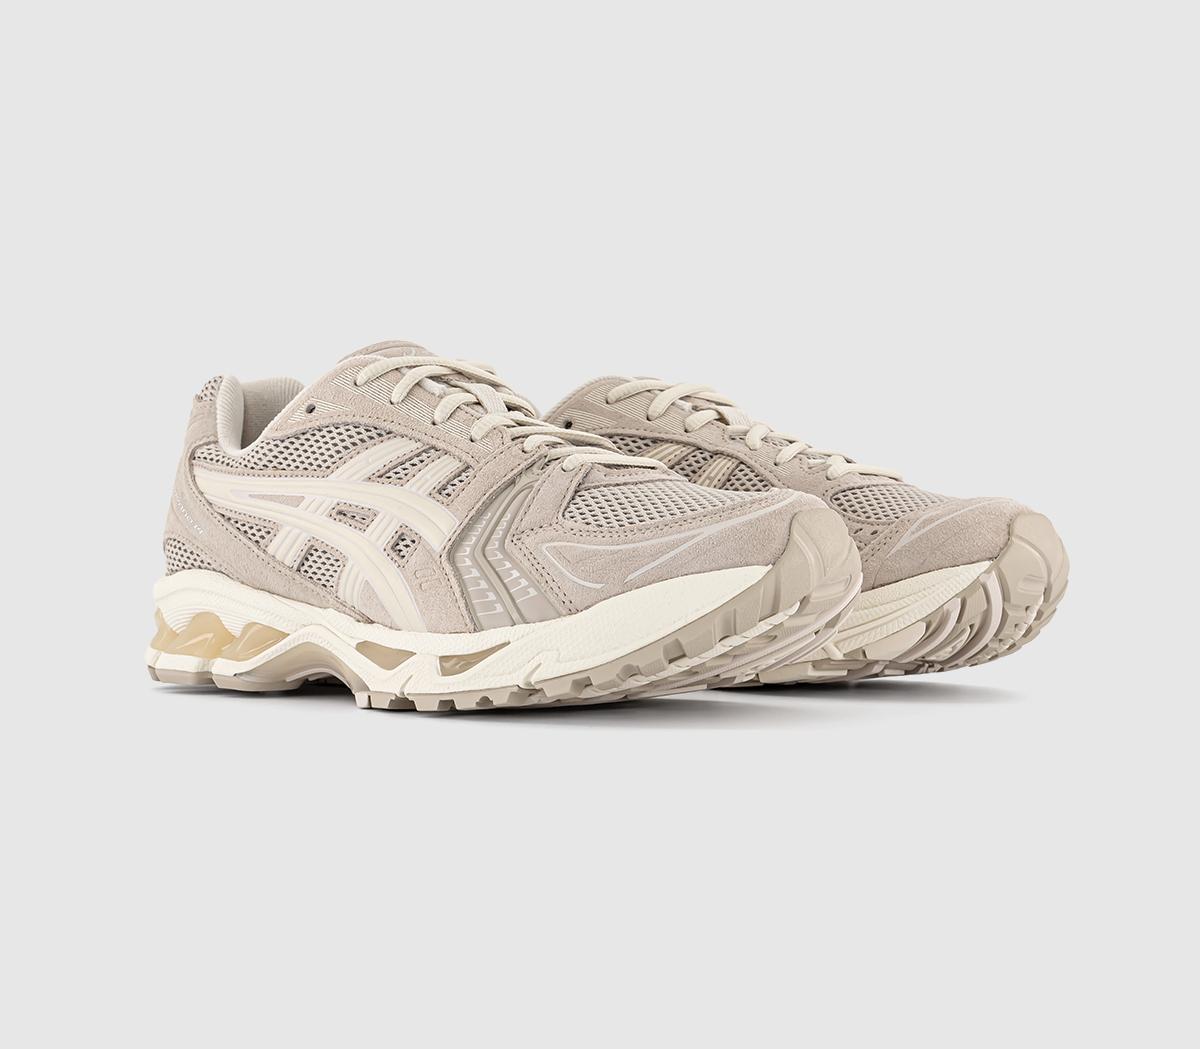 Asics Gel-kayano 14 Trainers Simply Taupe Oatmeal In Natural, 8